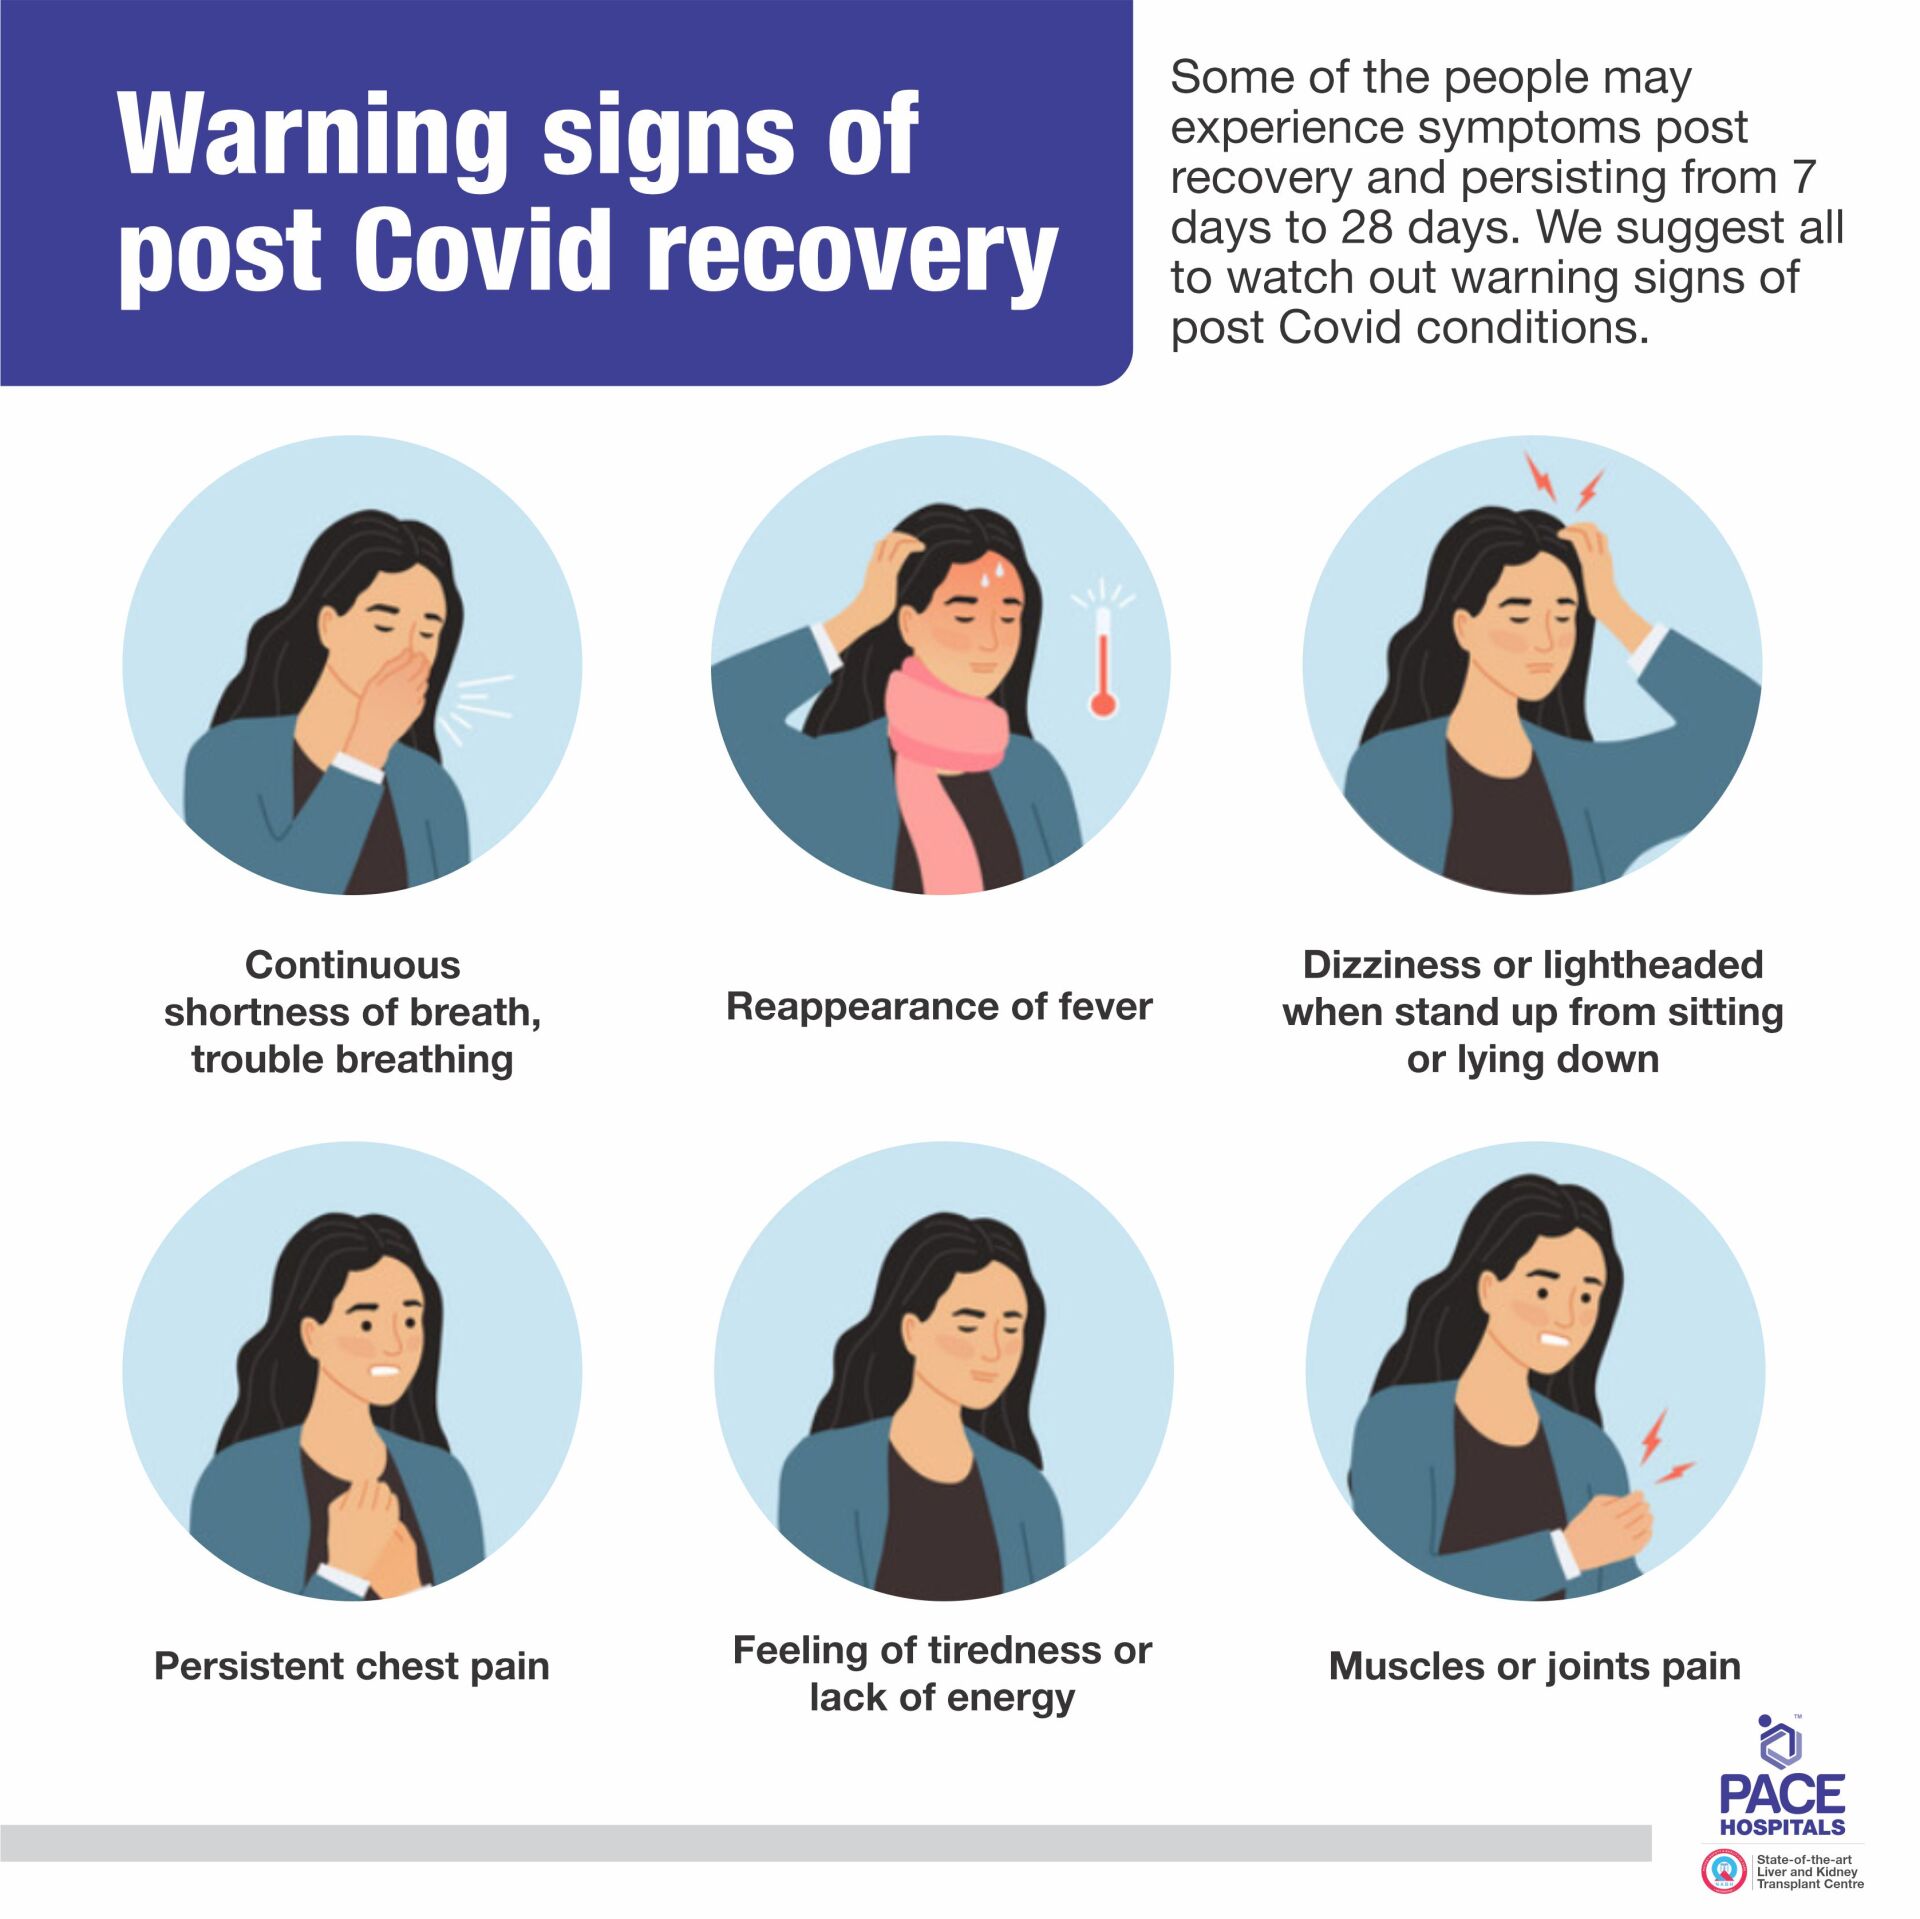 Post covid (coronavirus) recovery symptoms and warning signs - Pace Hospitals